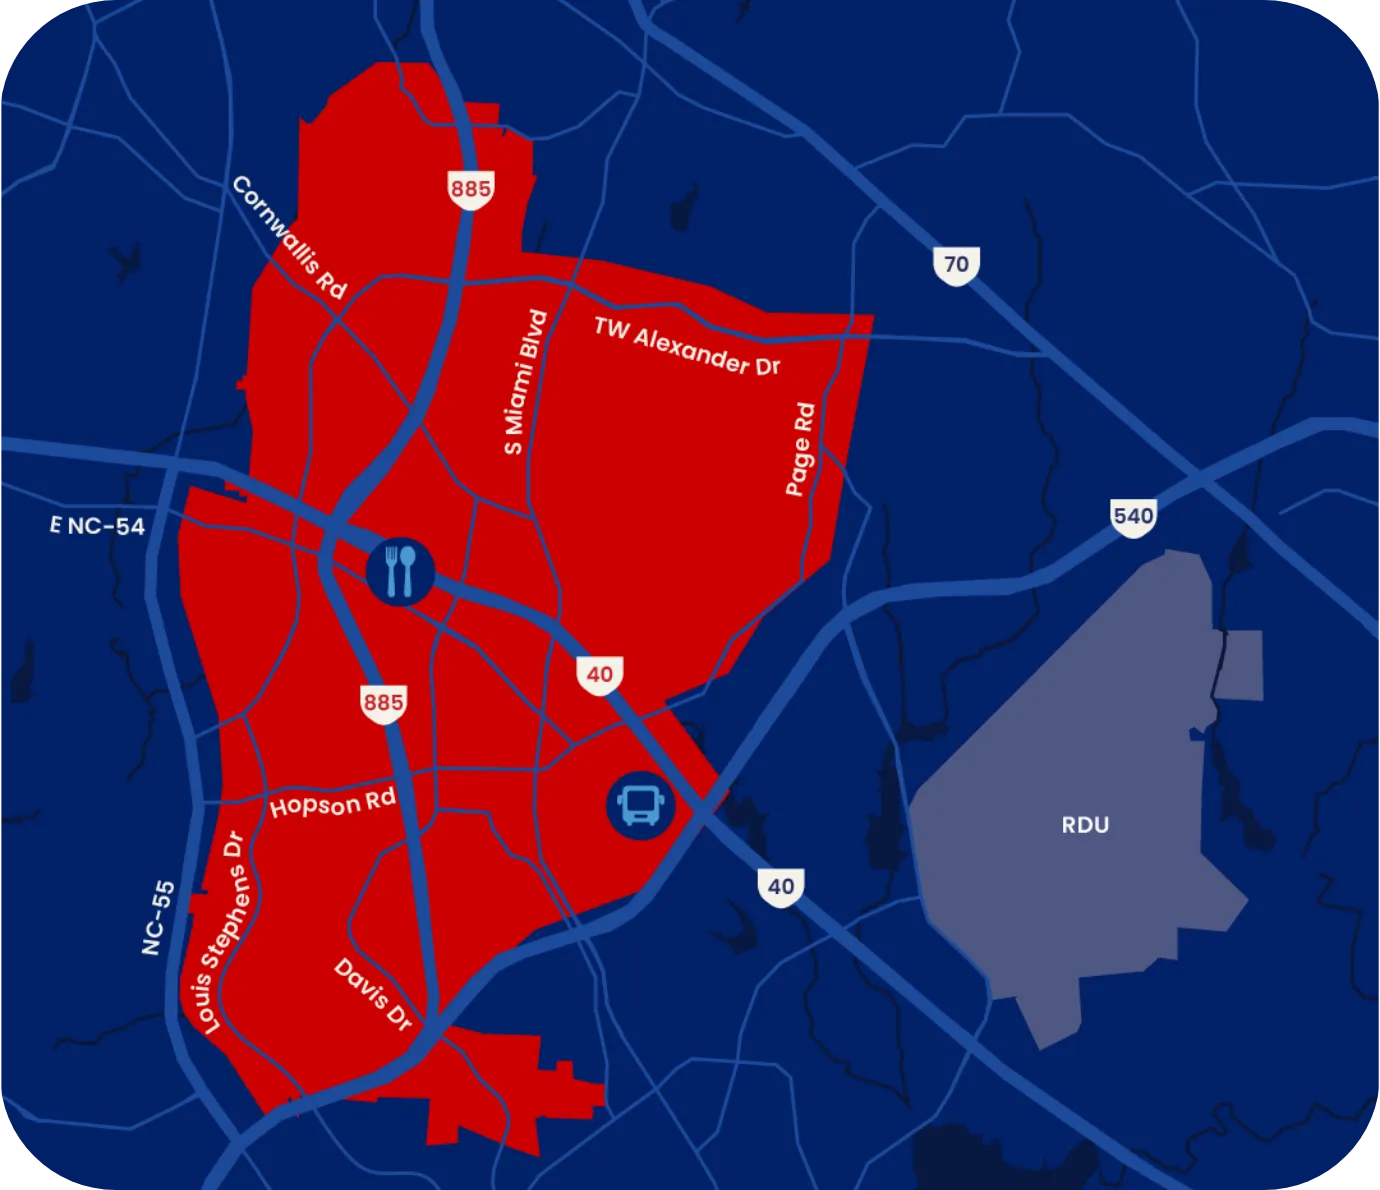 RTP Connect service area map with icons showing where Boxyard RTP and the Regional Transit Center are located.